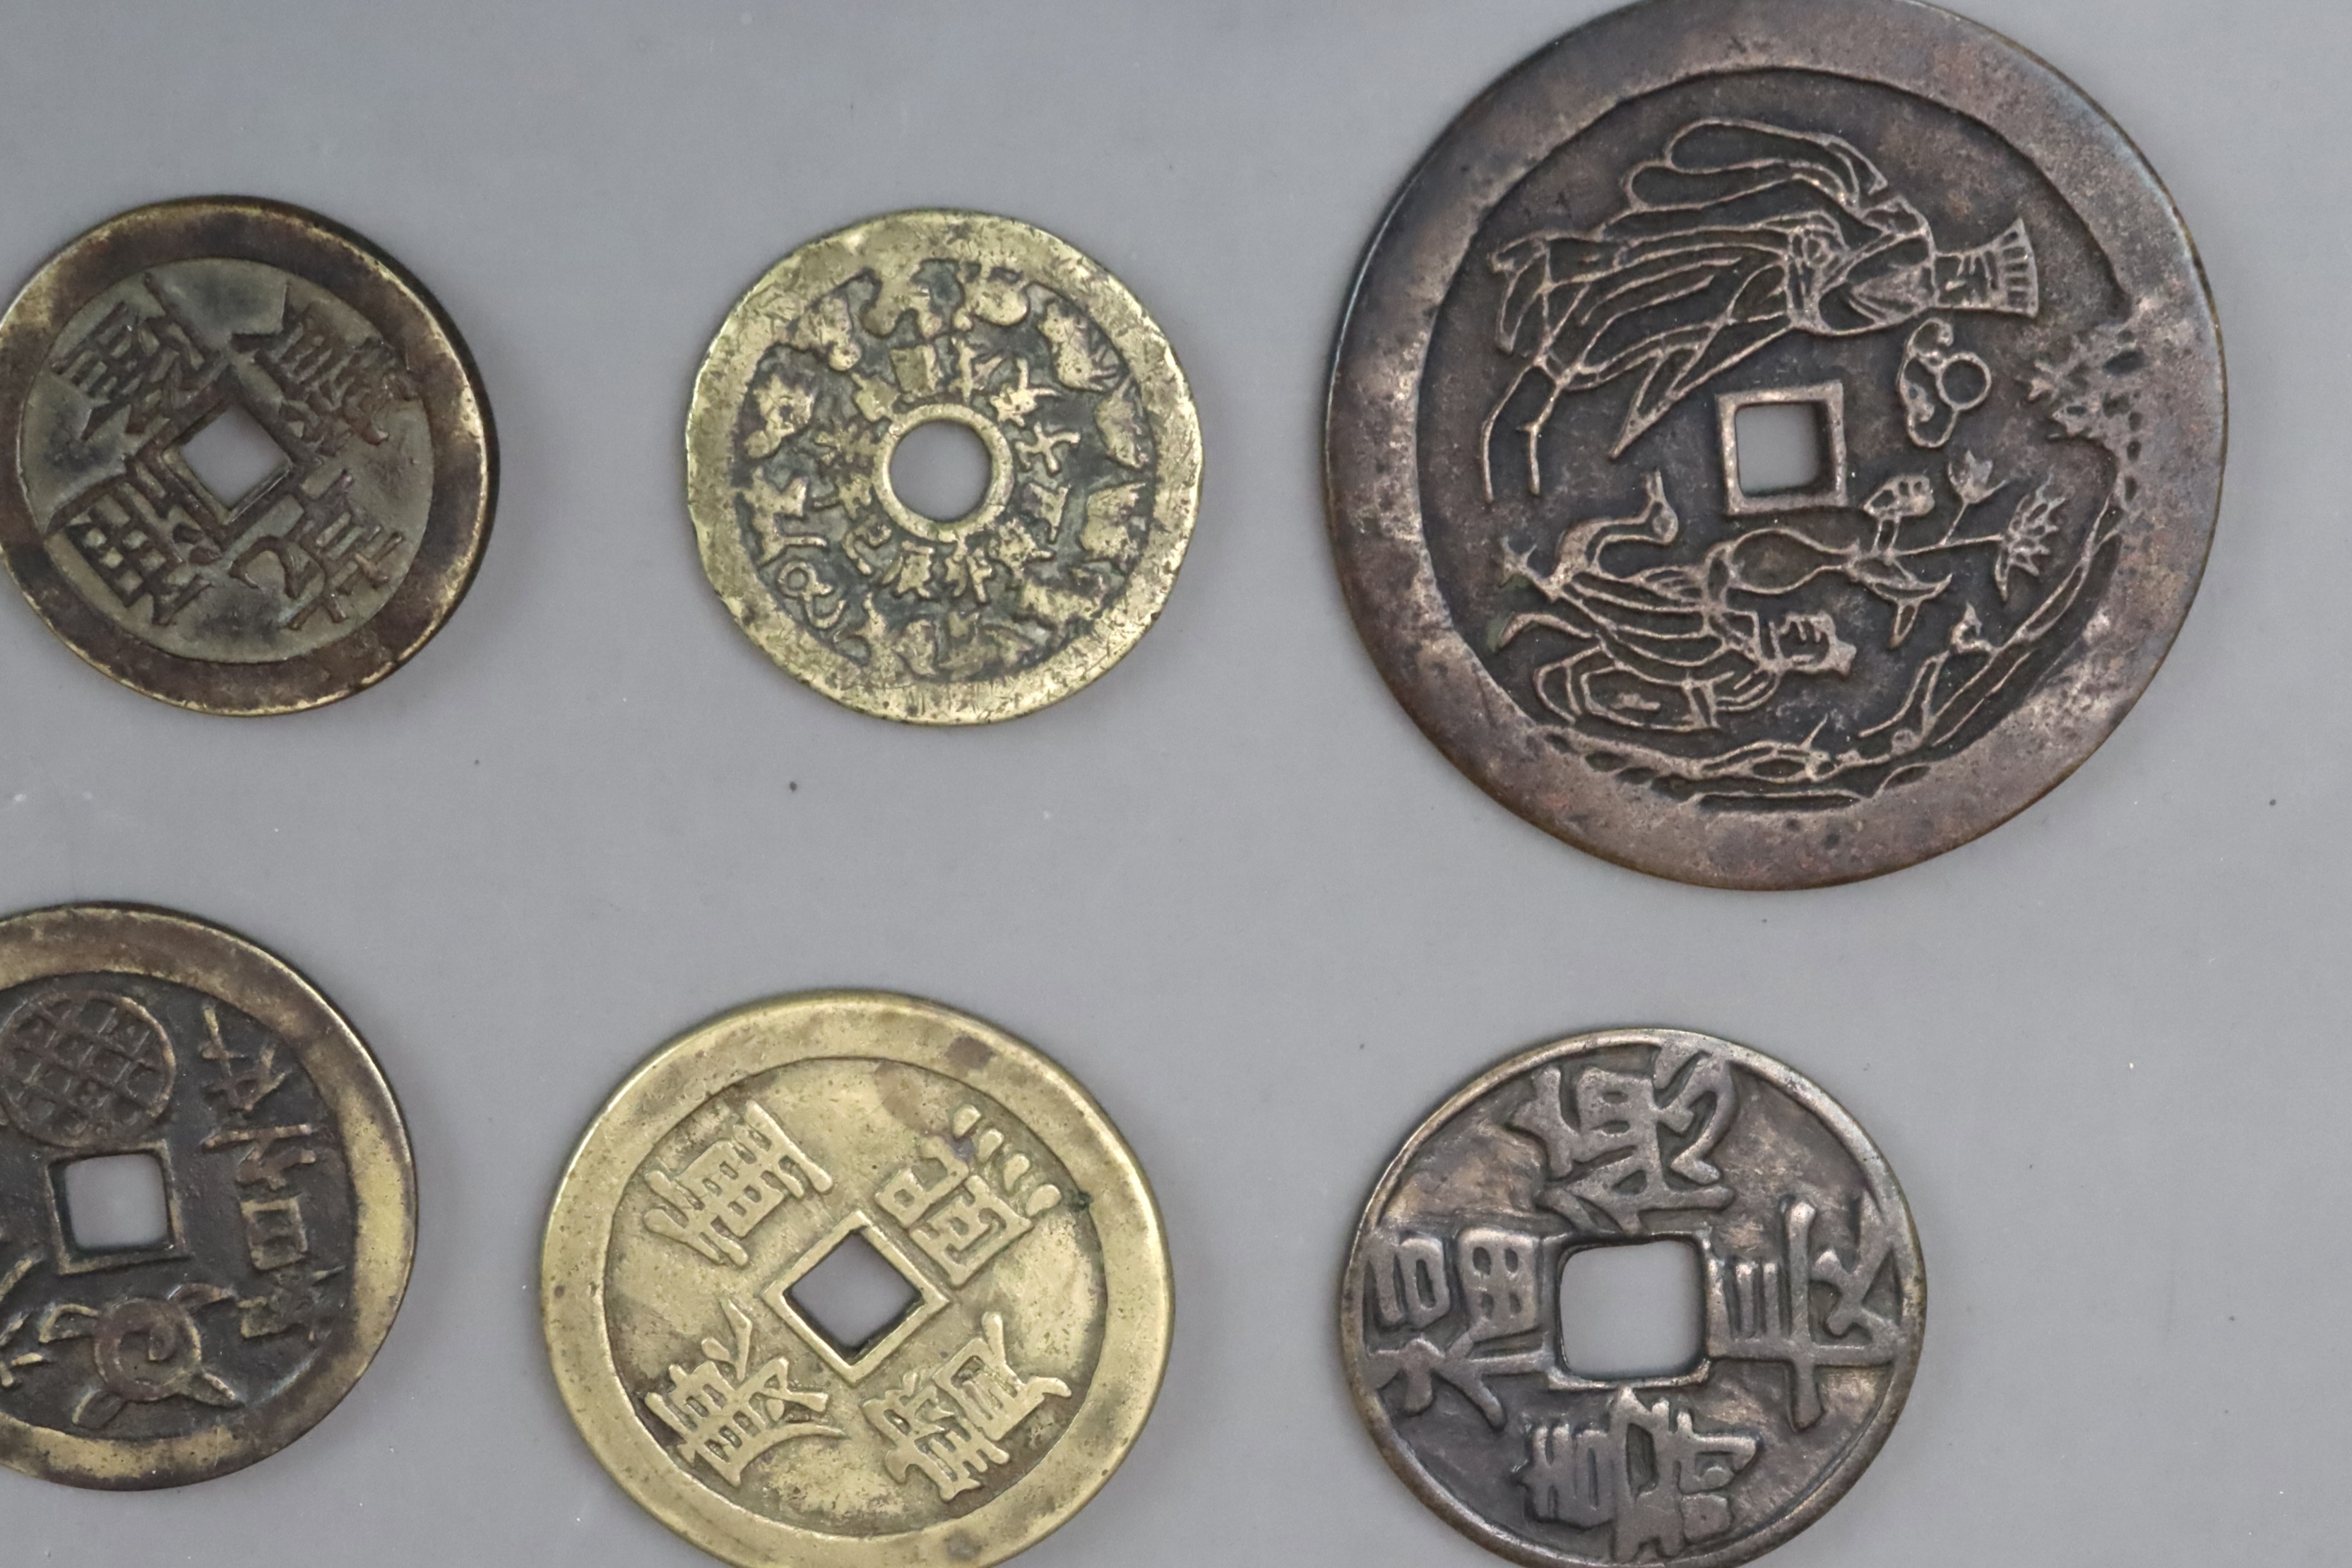 A Set of 12 Chinese Taoism Coins, Qing dynasty - Image 6 of 8